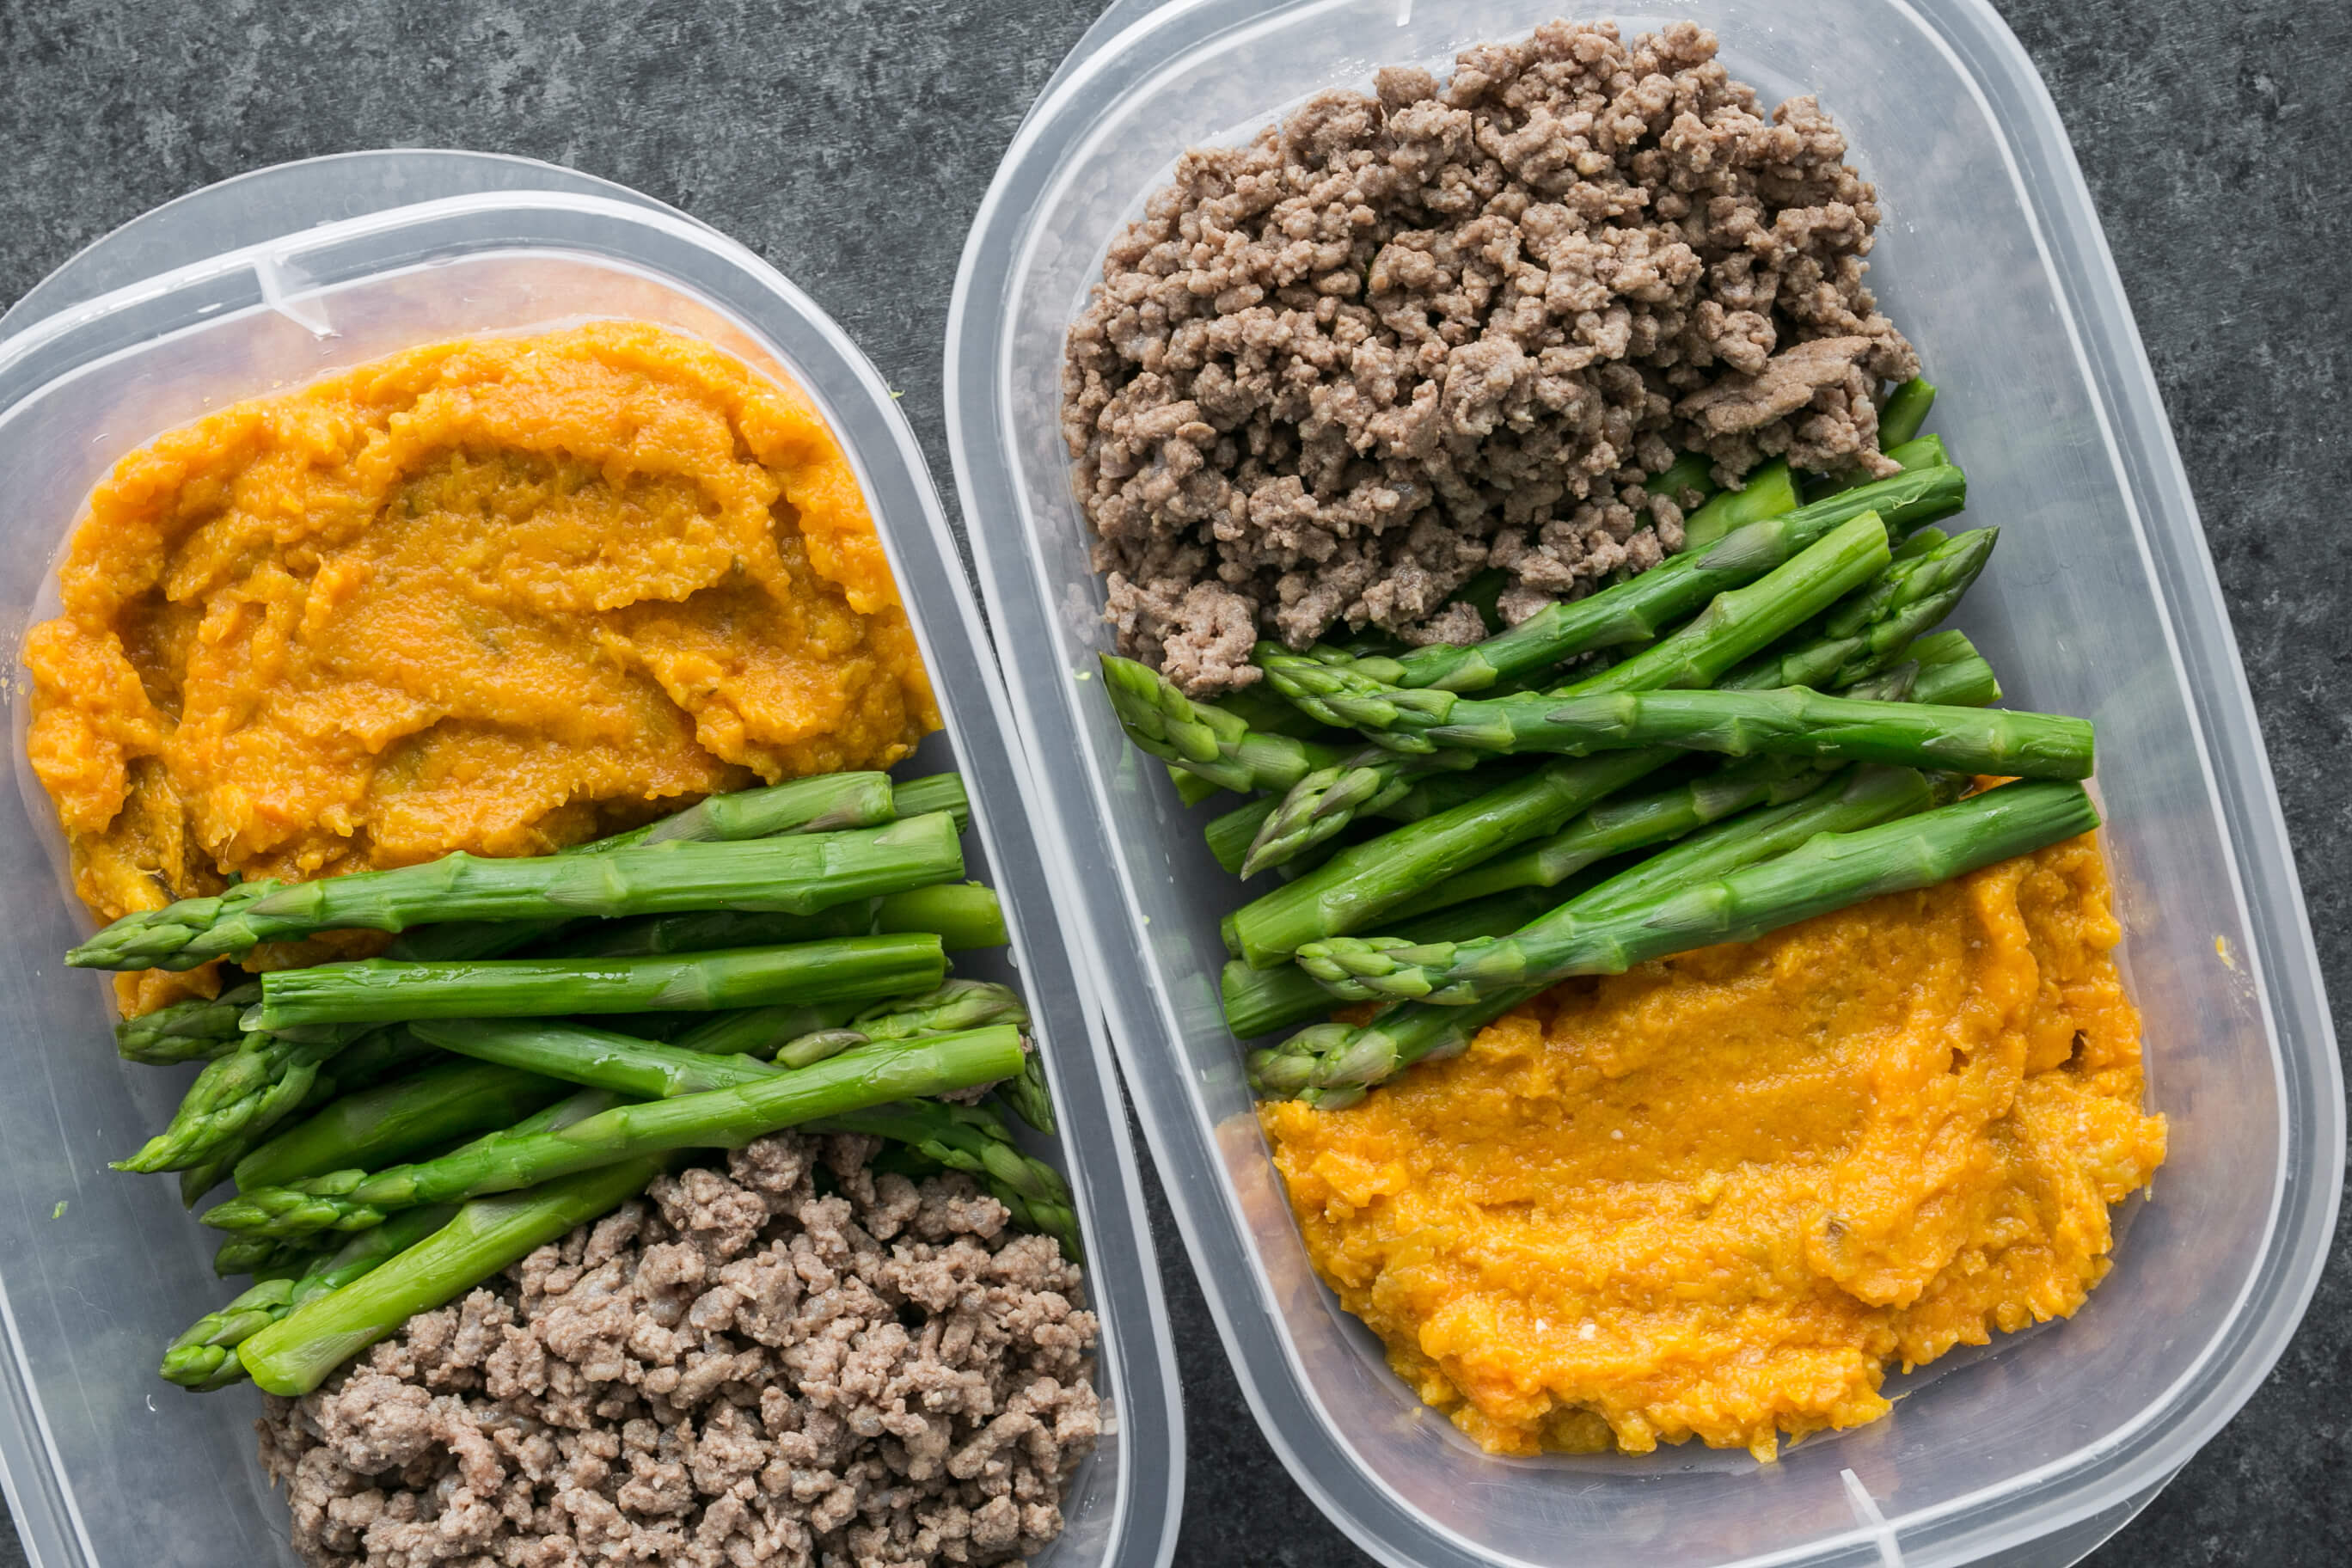 220 Simple Meals to Help Your Clients Hit Their Macros: Ground Beef, Asparagus & Mashed Sweet Potatoes